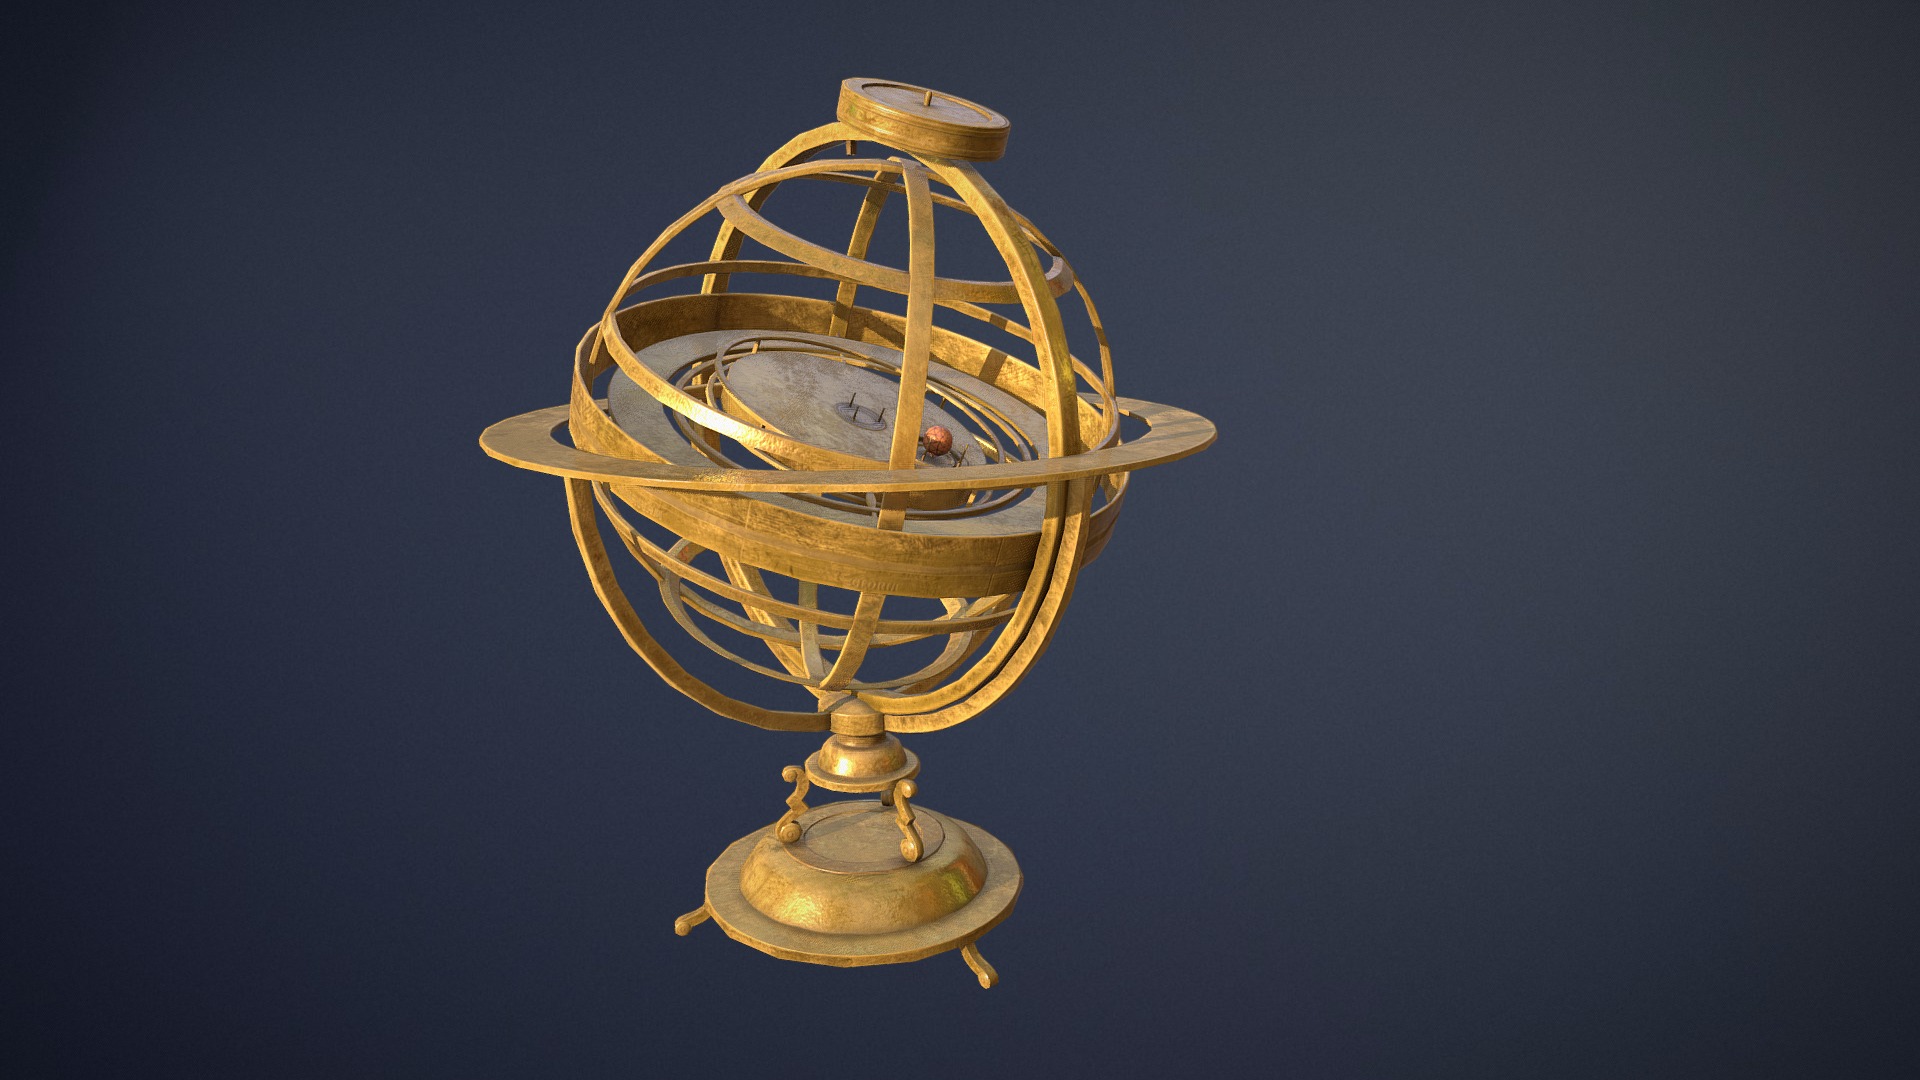 3D model Old Brass Globe – game-ready asset - This is a 3D model of the Old Brass Globe - game-ready asset. The 3D model is about a gold and silver trophy.